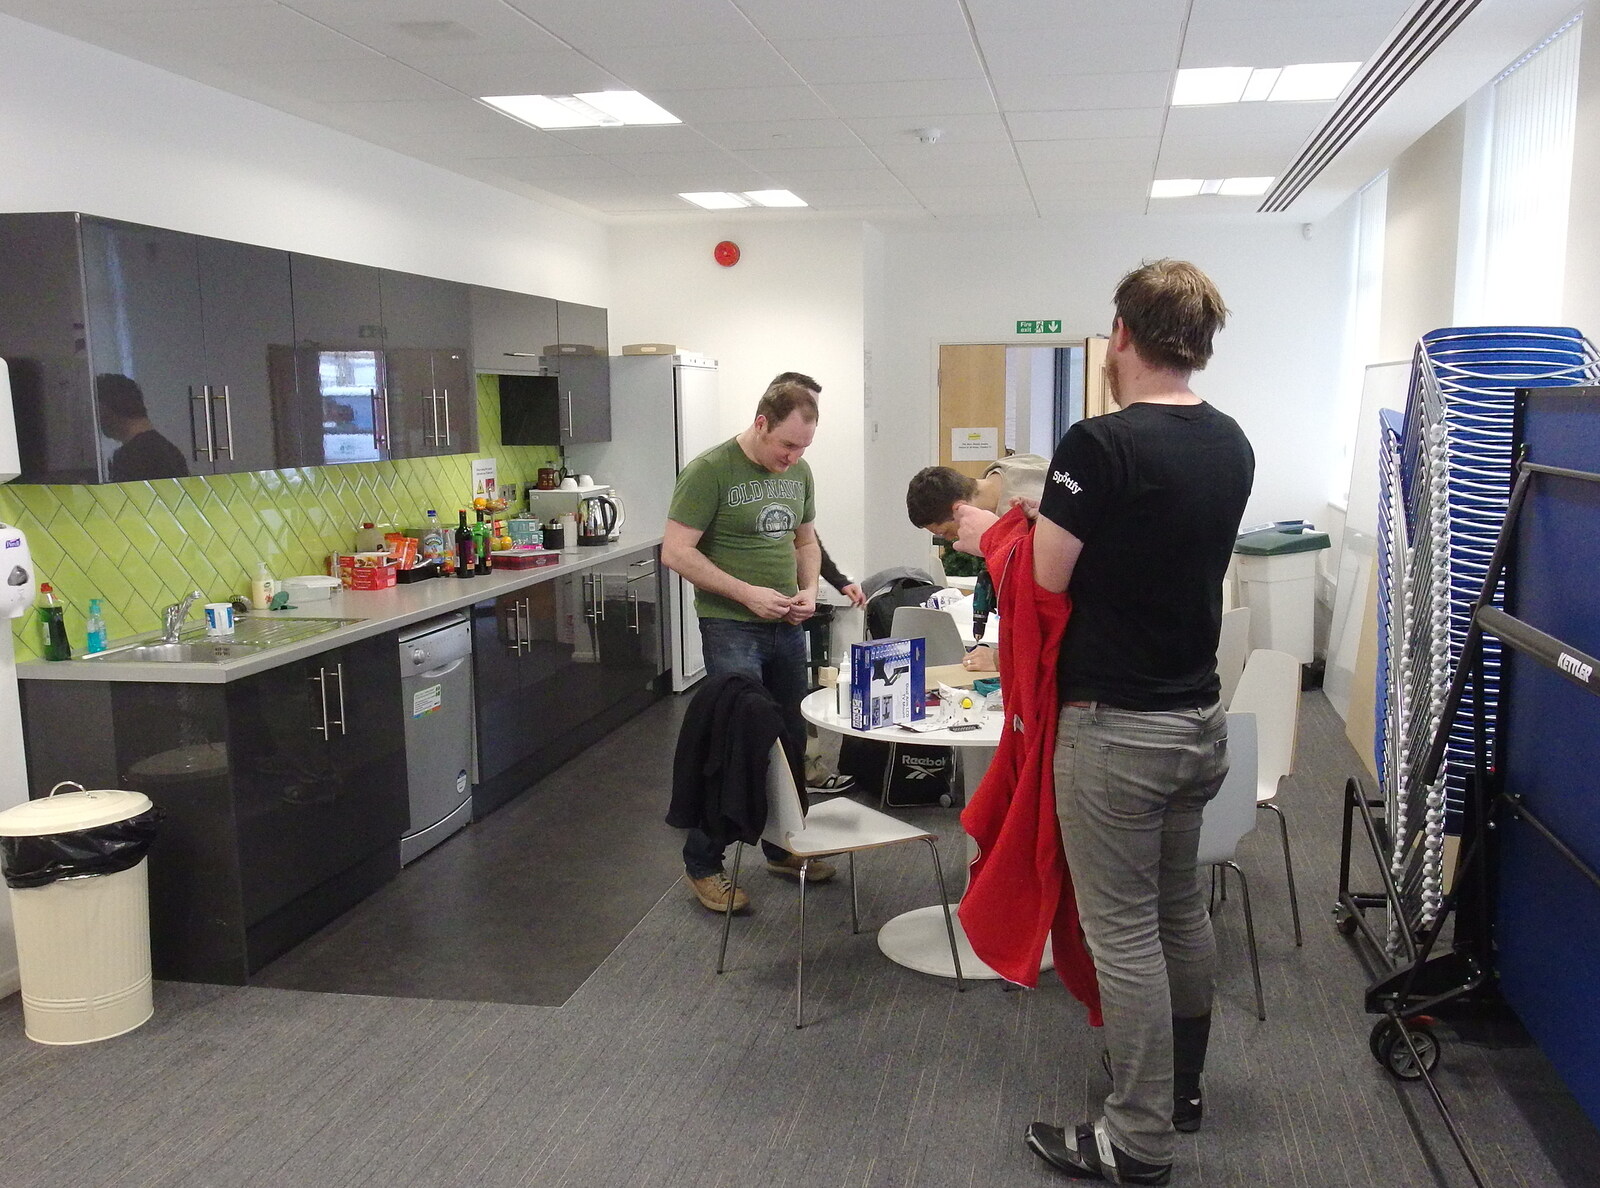 SwiftKey's Arcade Cabinet, and the Streets of Southwark, London - 5th December 2013: Morning activity in the kitchen area